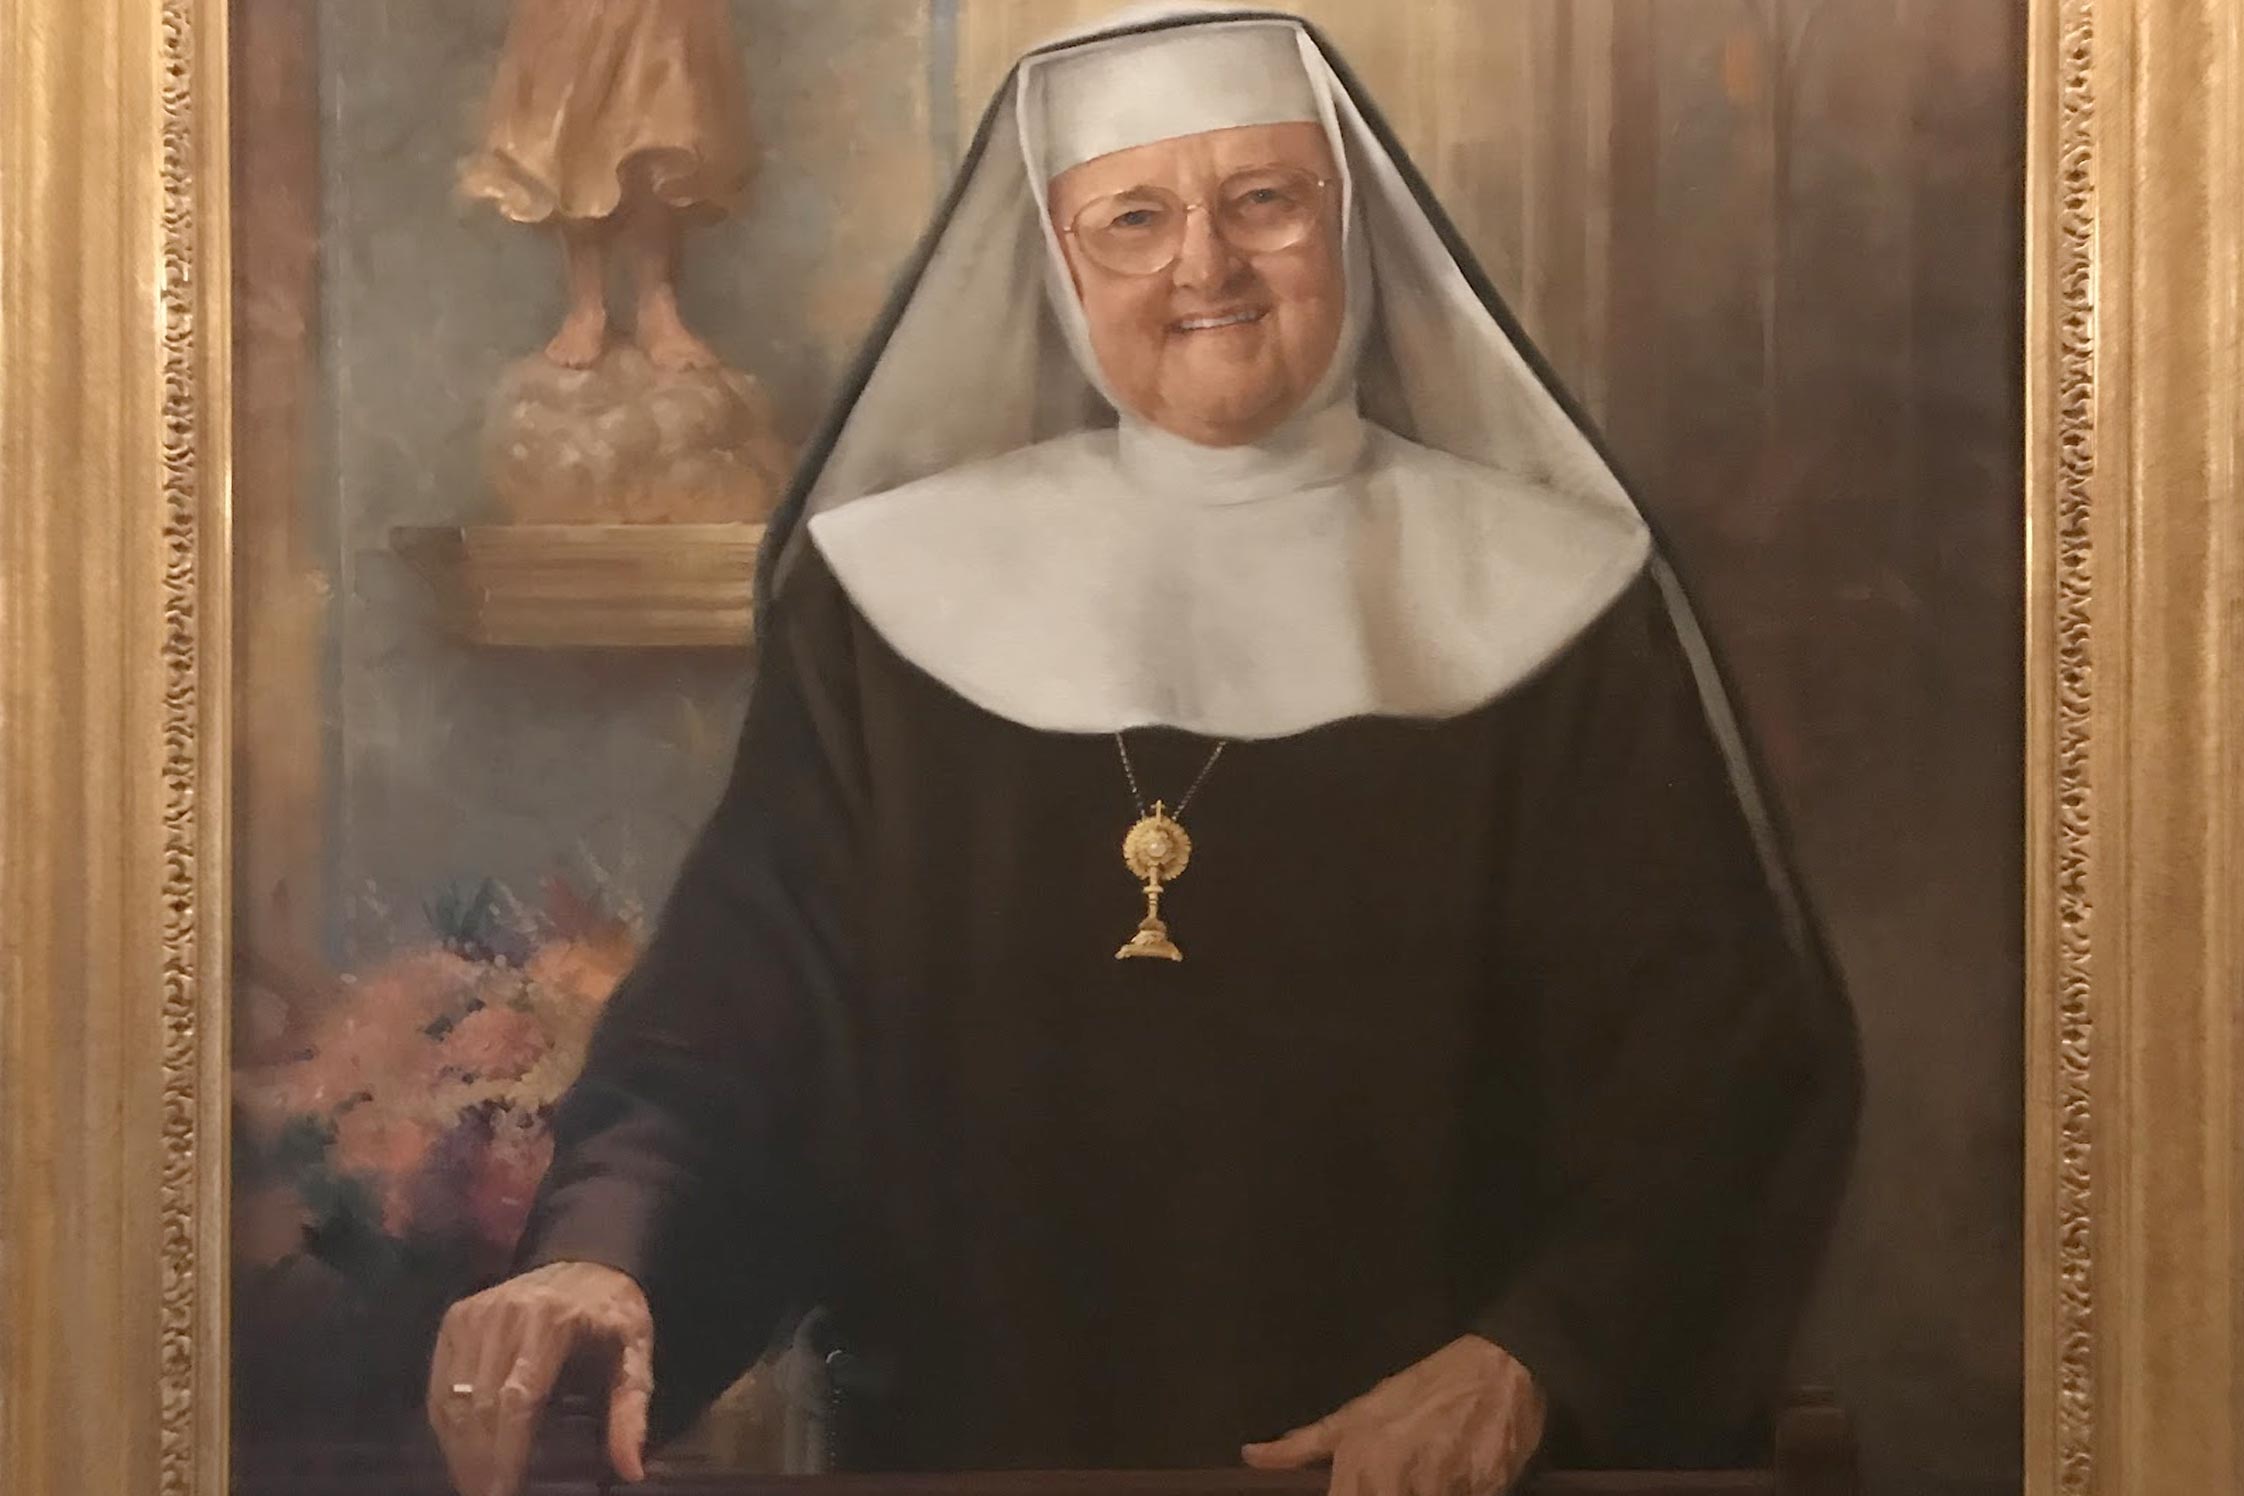 Painting of a nun smiling in a gilded frame on a wall